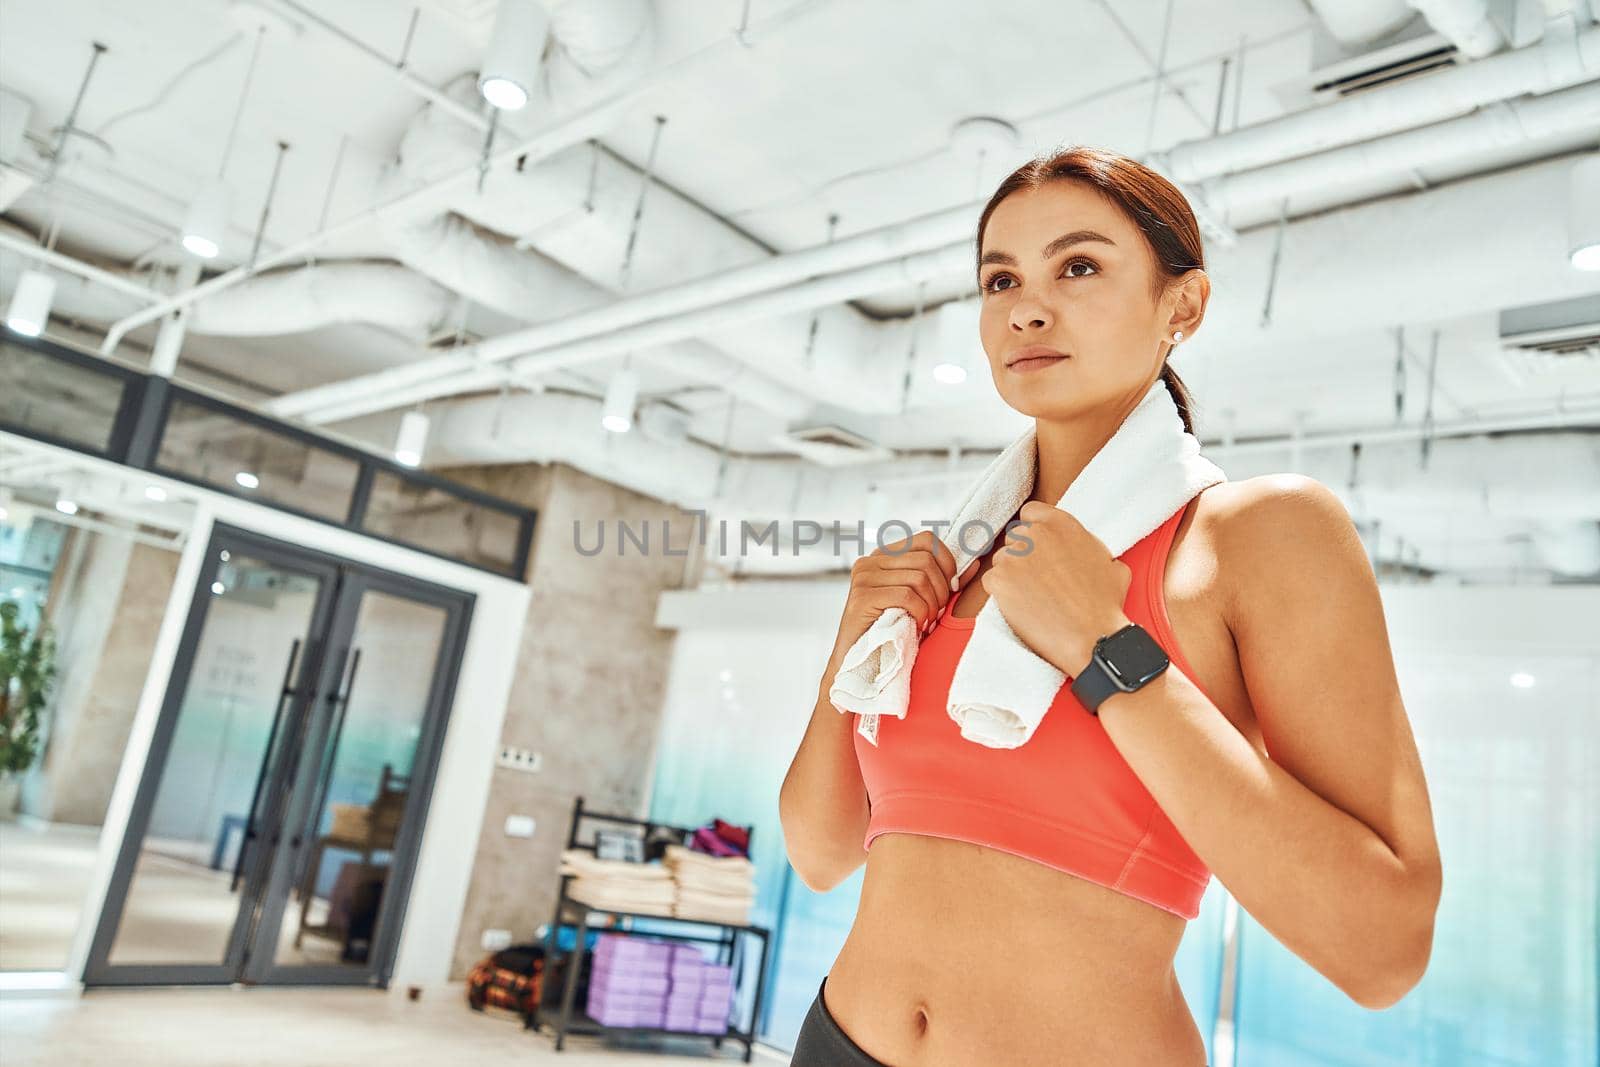 Resting after workout. Young beautiful fit woman with white towel on shoulders looking away while standing in fitness studio or gym. Sport, training, wellness and healthy lifestyle